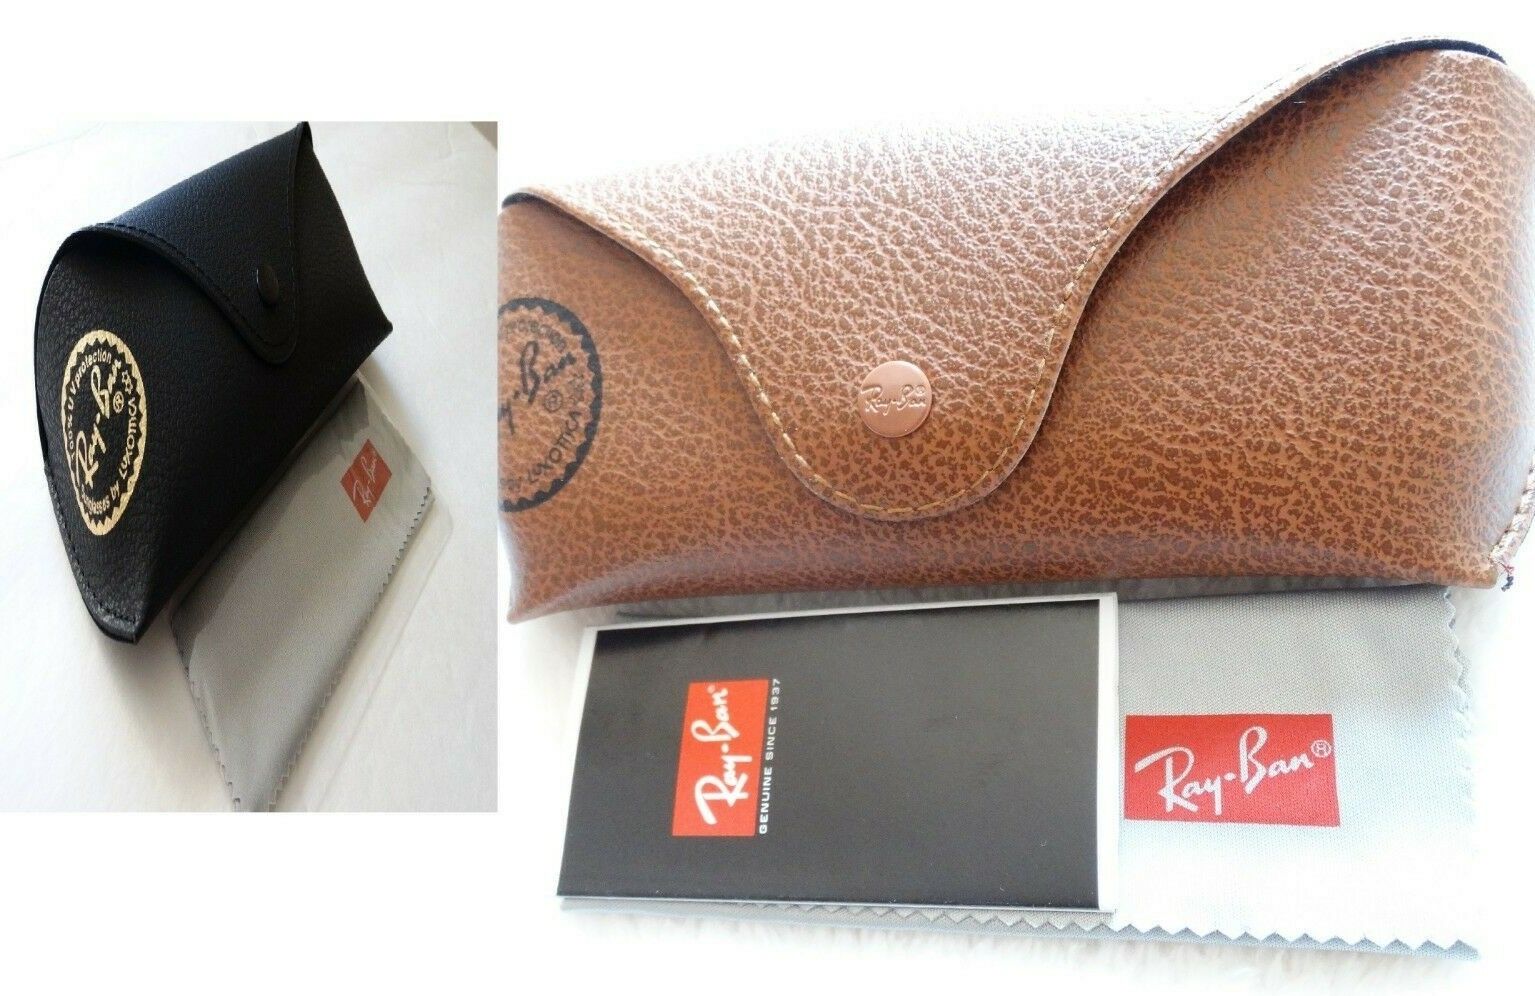 Ray Ban Brand New Leather Case Black & Brown With Cleaning Cloth